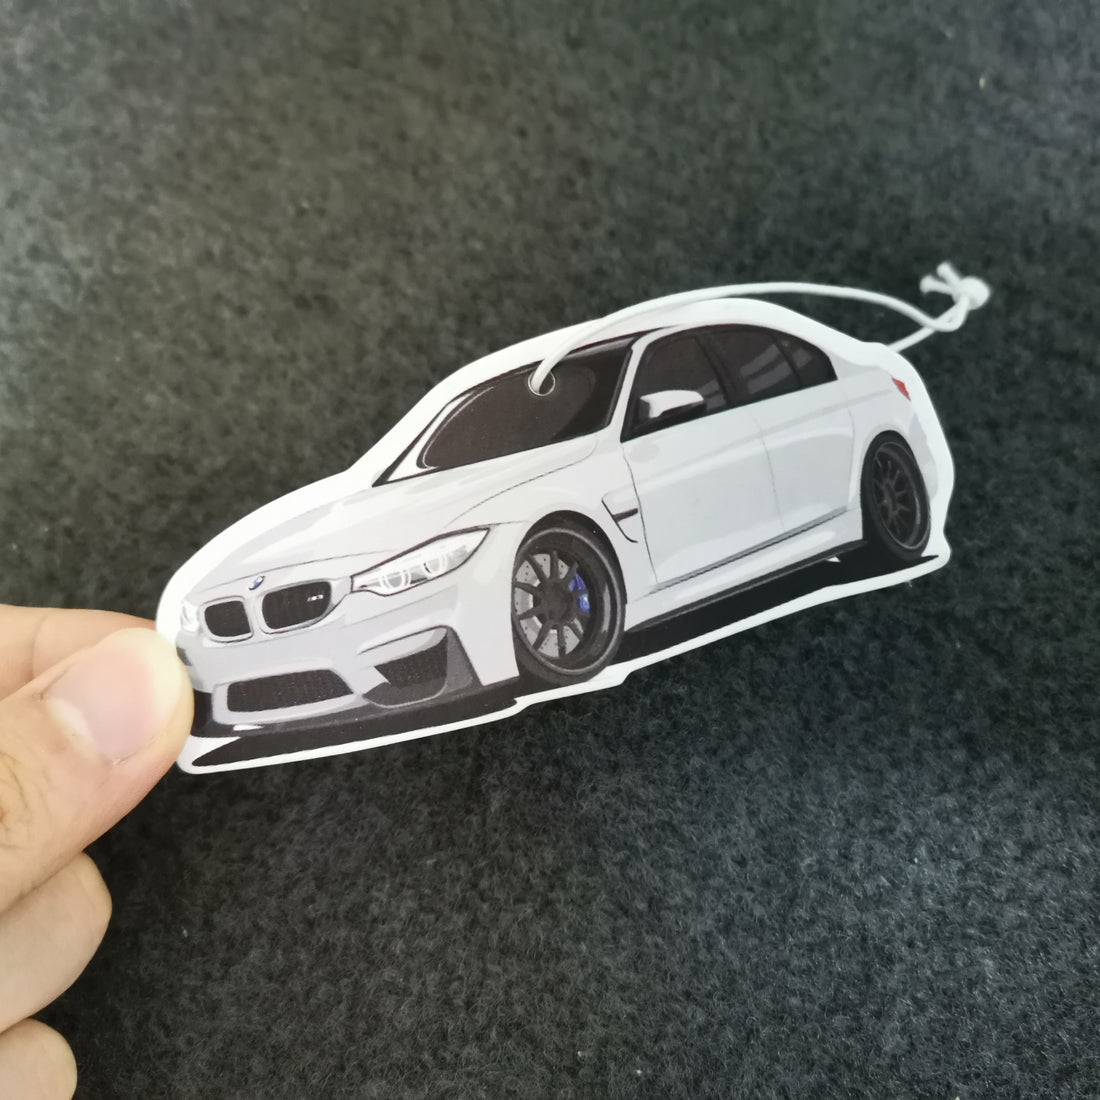 Hot Sale Car Air Freshener Hanging Auto Rearview Mirror Perfume Pendant Solid Paper JDM For E46 E90 M3 M4 M5 Accessories nba